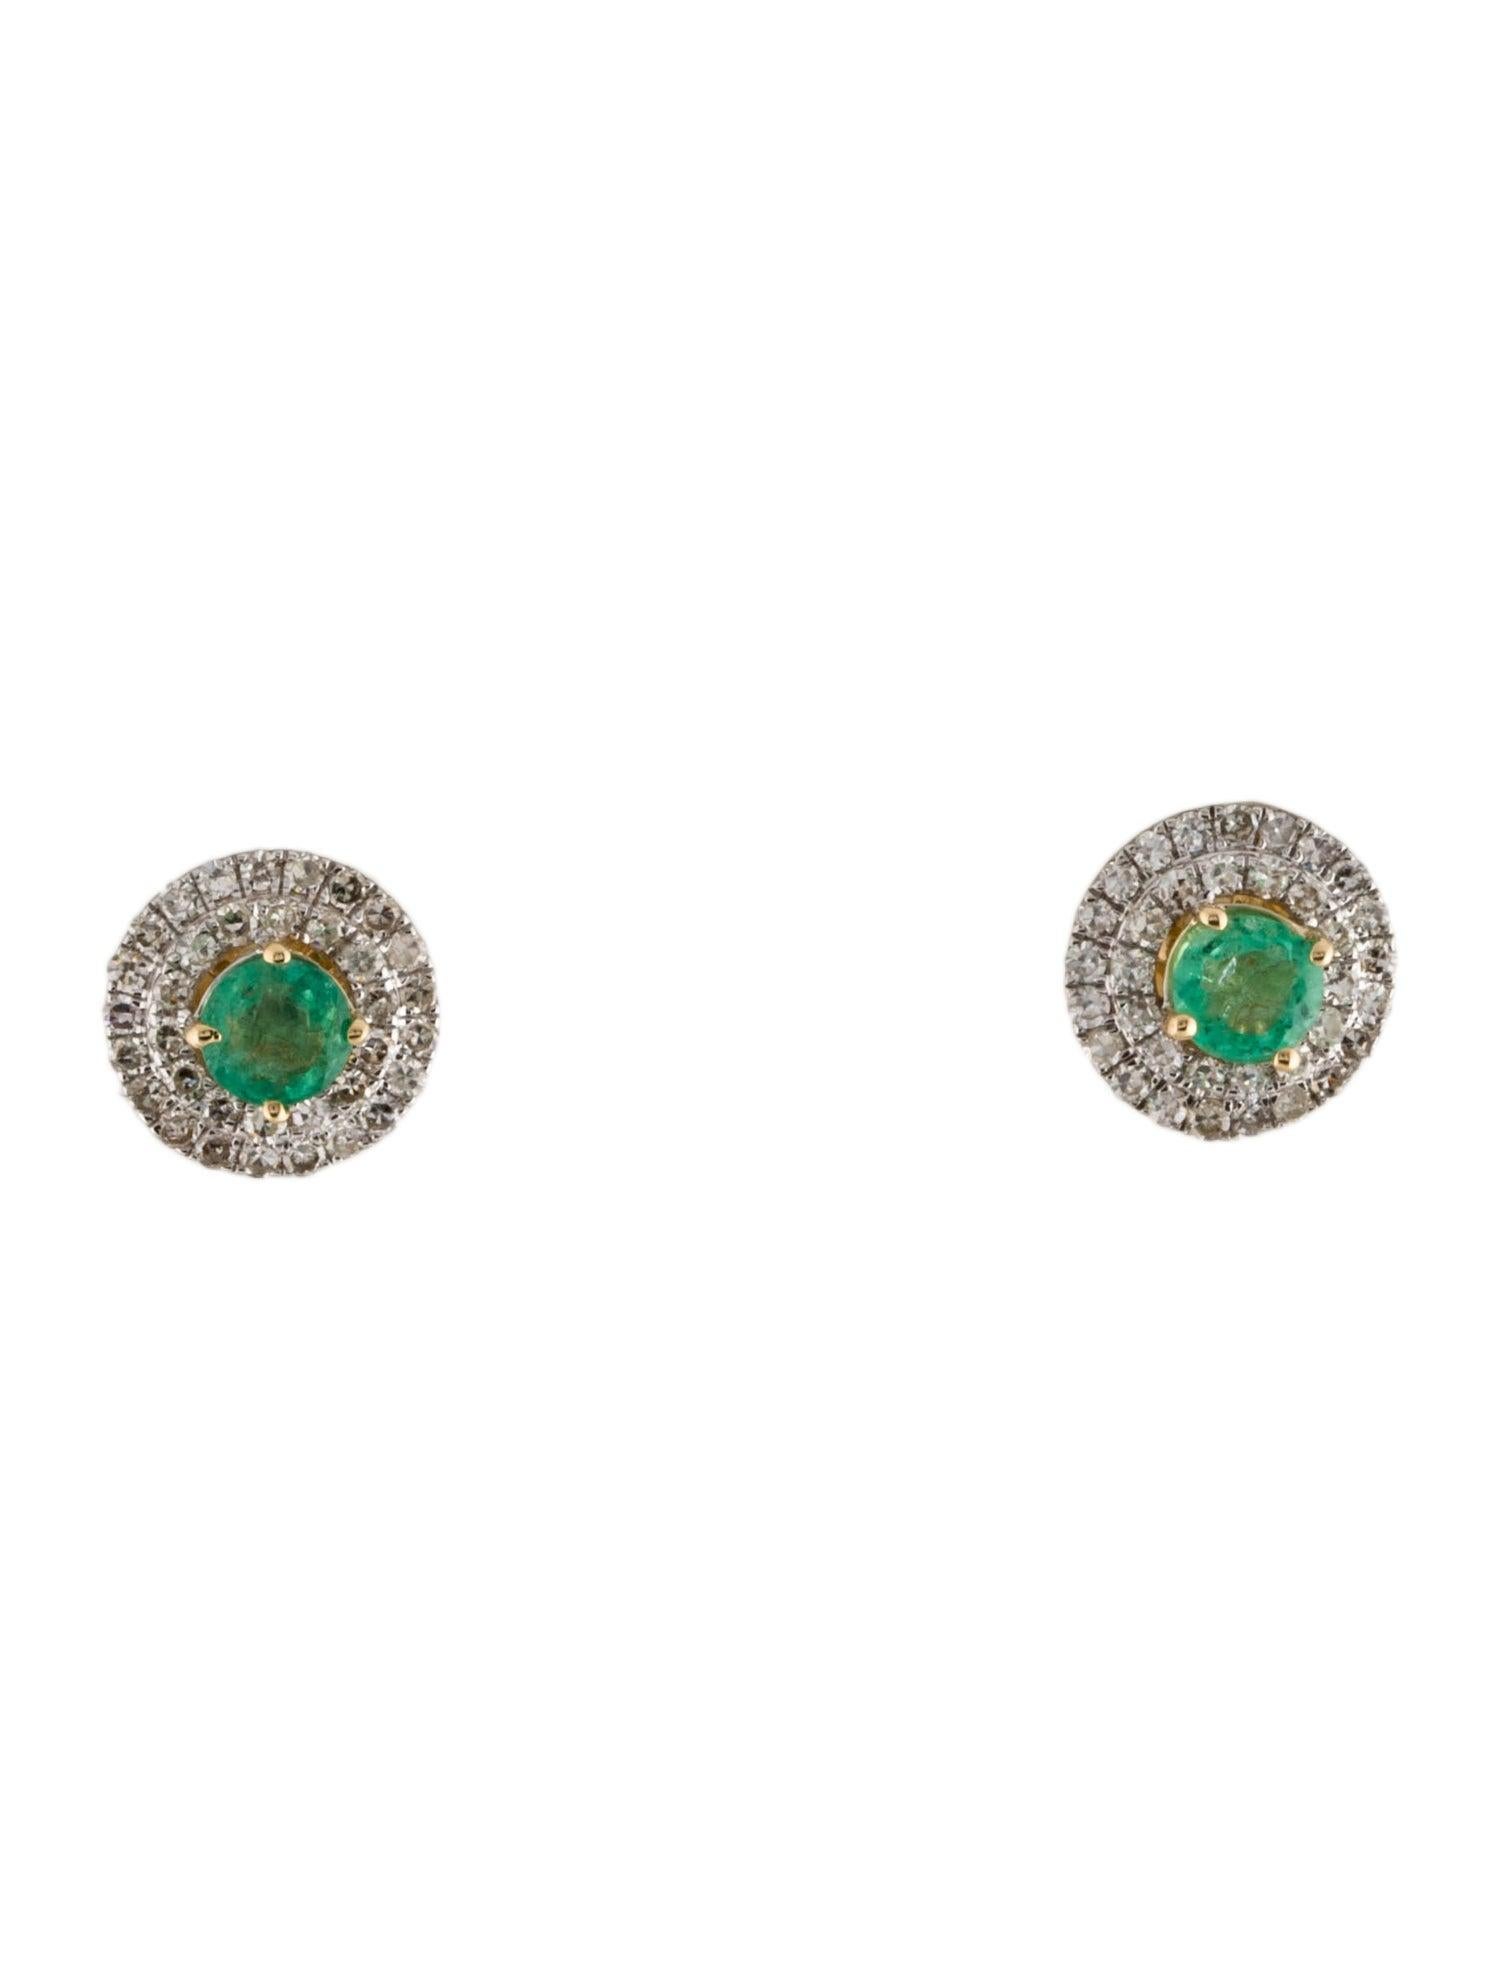 Immerse yourself in the enchanting allure of nature with our Forest Ferns collection, and embrace the elegance of our exquisite Emerald and Diamond Earrings. Crafted with meticulous detail, these earrings are inspired by the delicate fronds of ferns